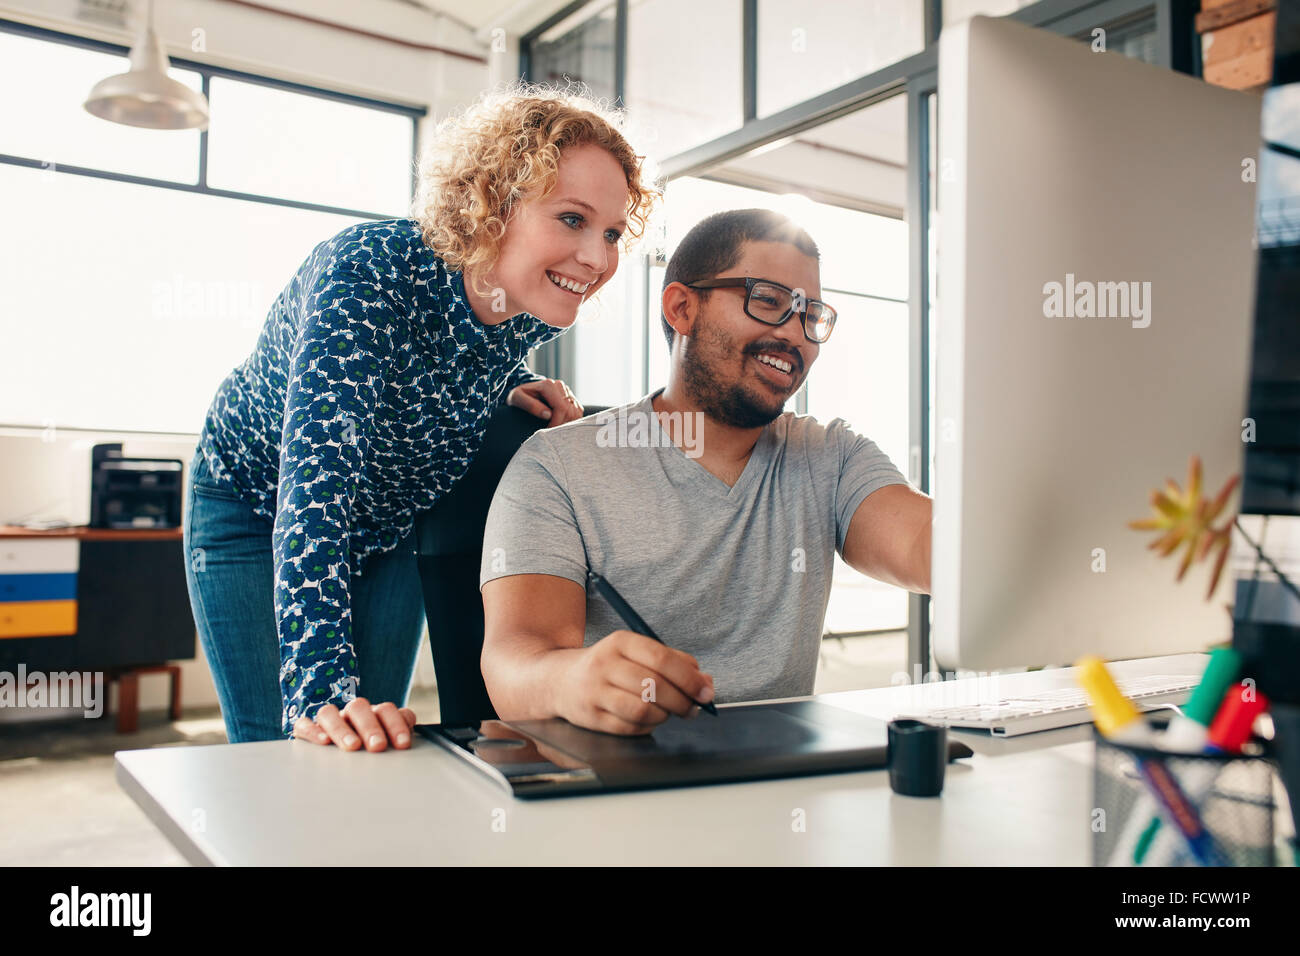 Two young male and female designers working together, with man editing artwork using graphics tablet and a stylus. Creative peop Stock Photo